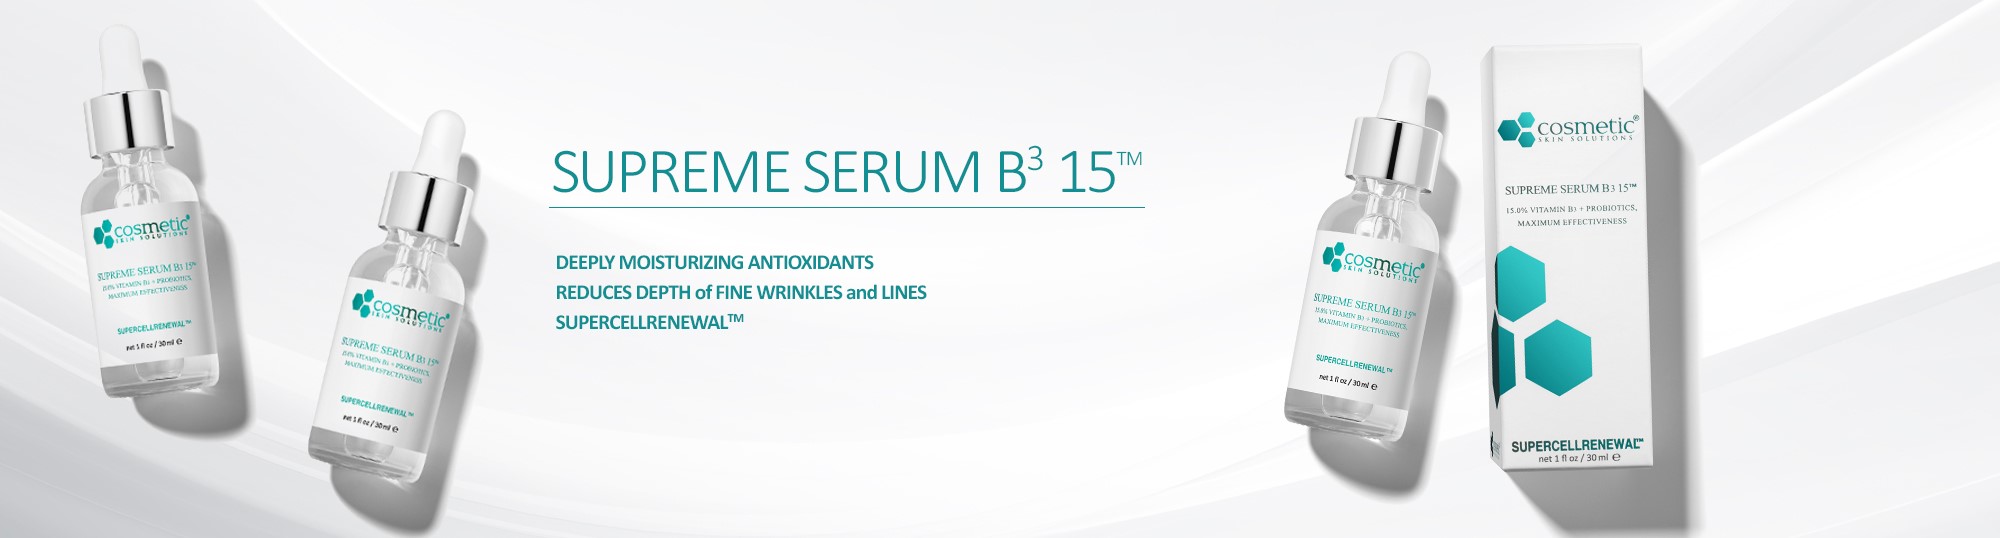 Supreme Serum B3 15™ | Maximum 15% Niacinamide | SUPERCELLRENEWAL™ SUPERHYDRATE™ antioxidant combines low molecular weight hyaluronic acid technology for timed release of antioxidants vitamin B3 and vitamin B5.